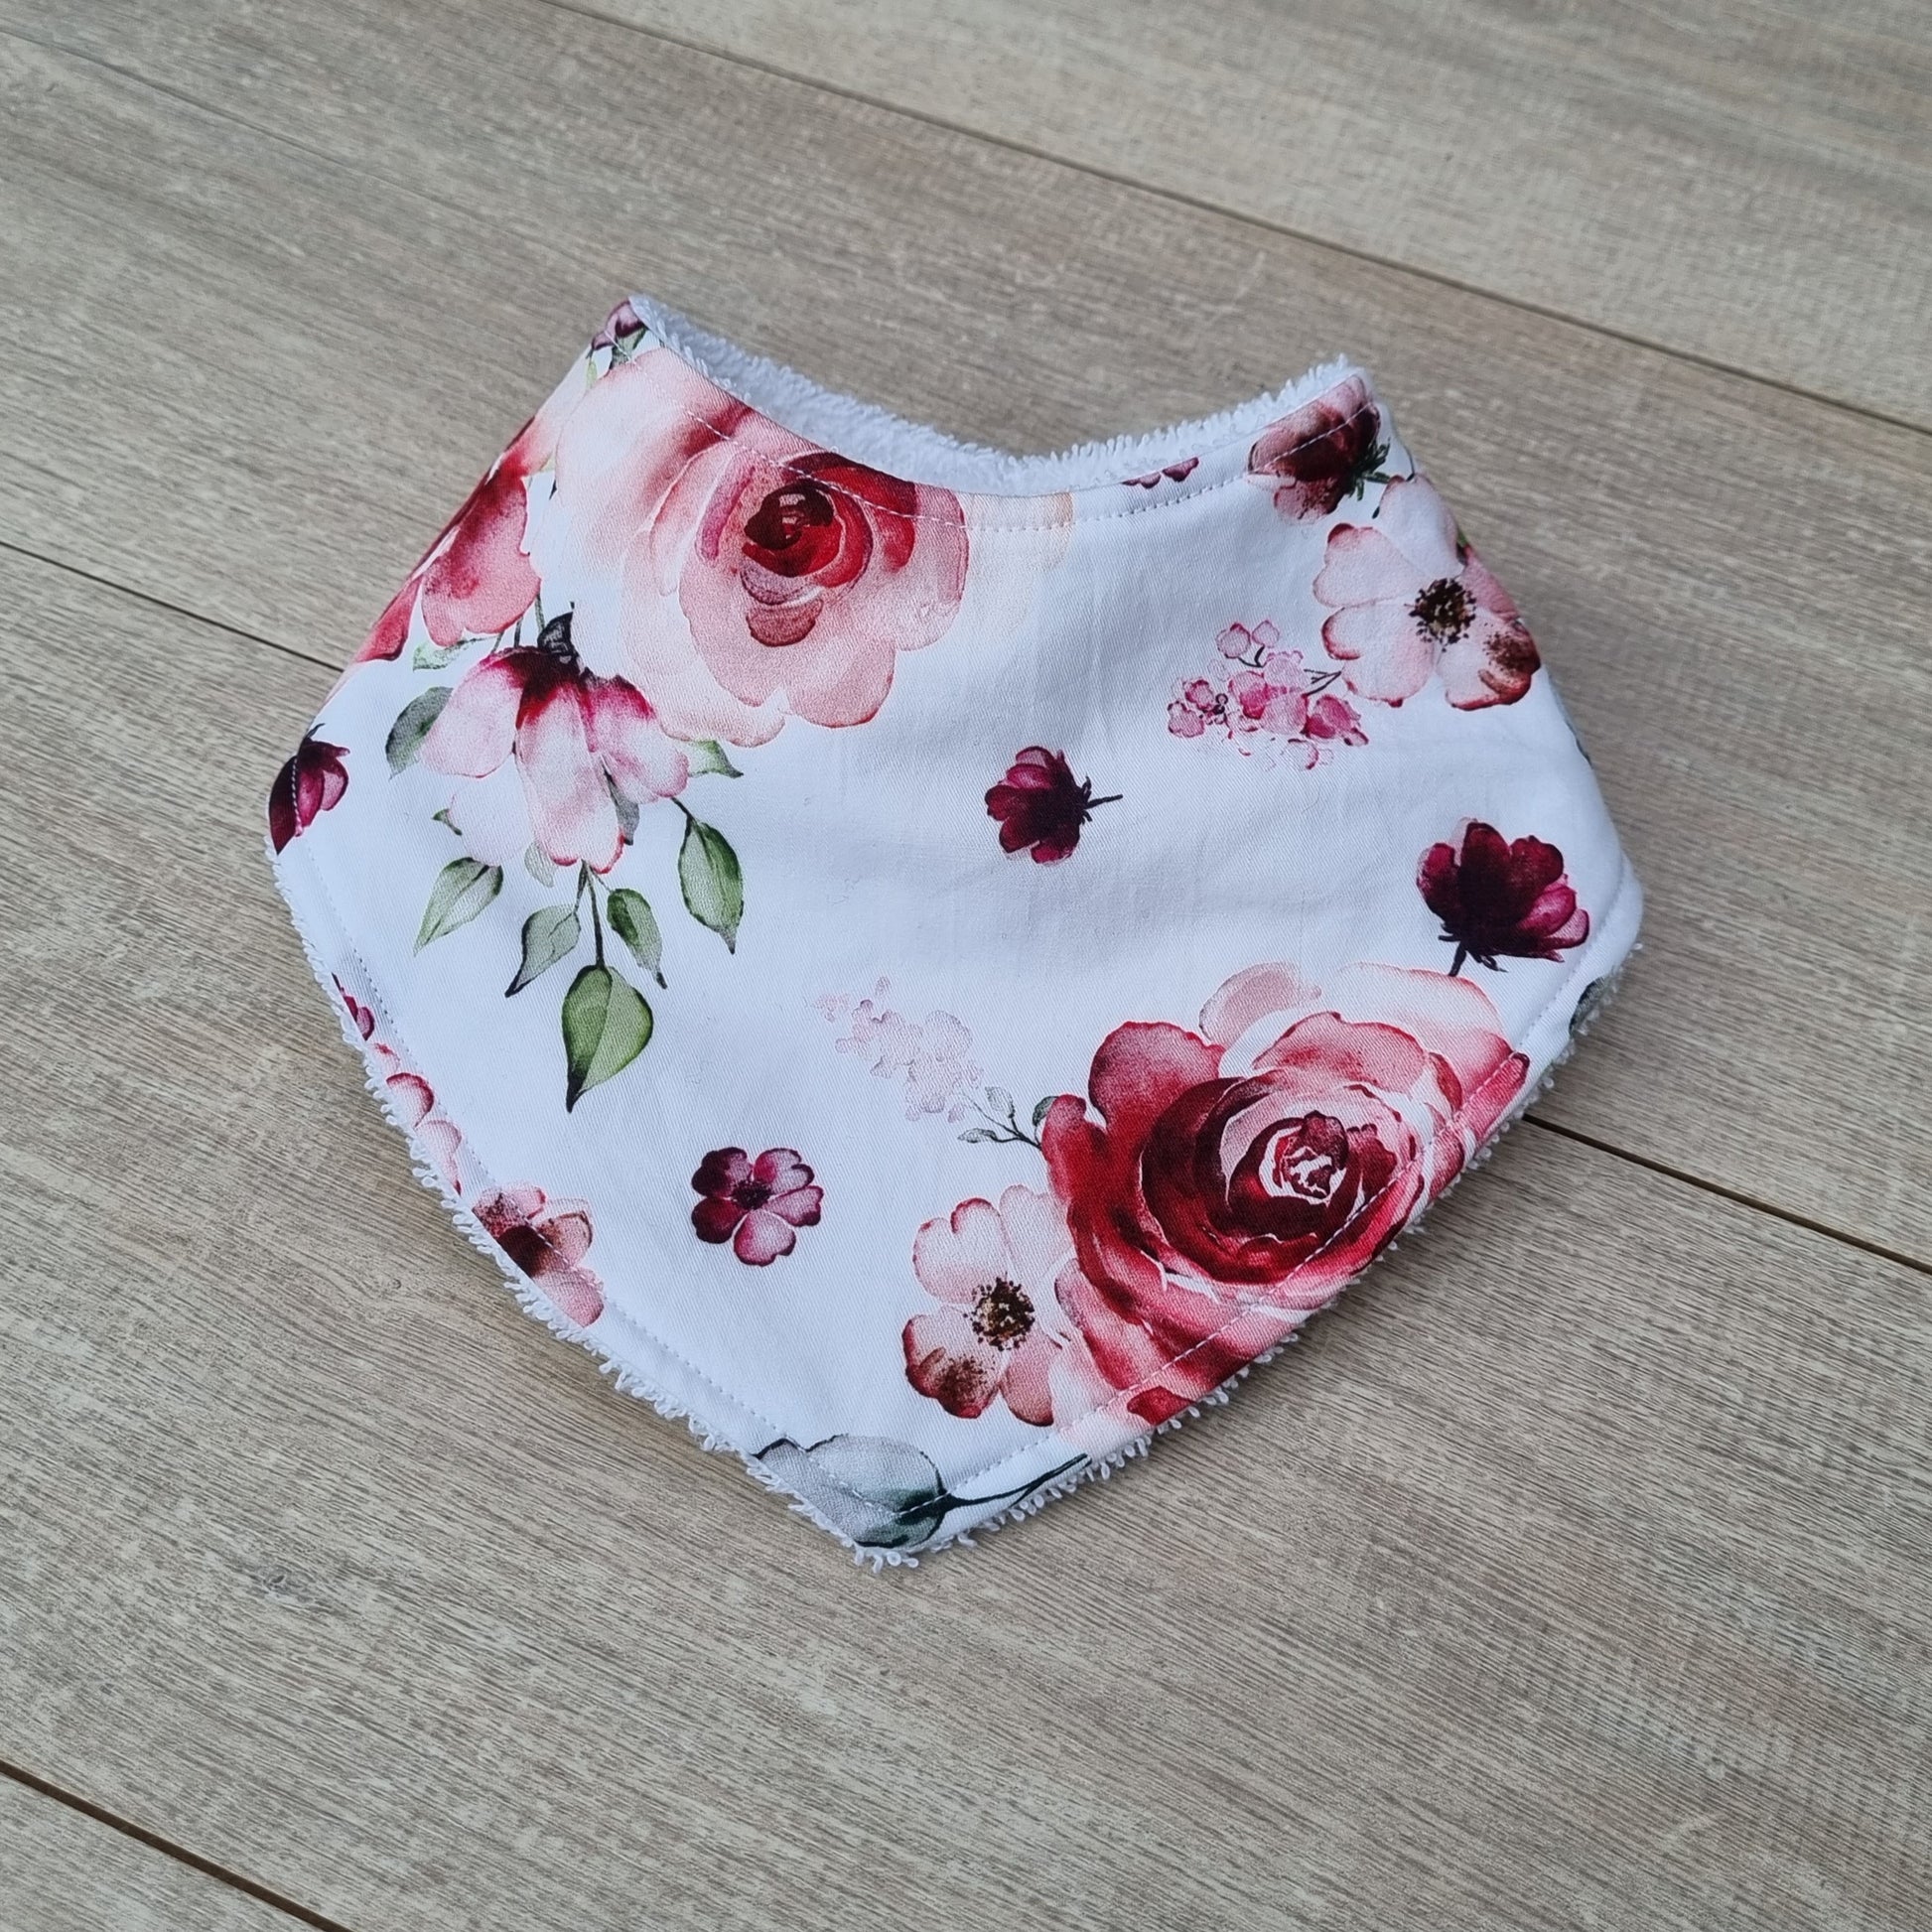 Dribble Bib - Rose Garden against wooden backdrop. Pink watercolour rose design with green leaves on white background.